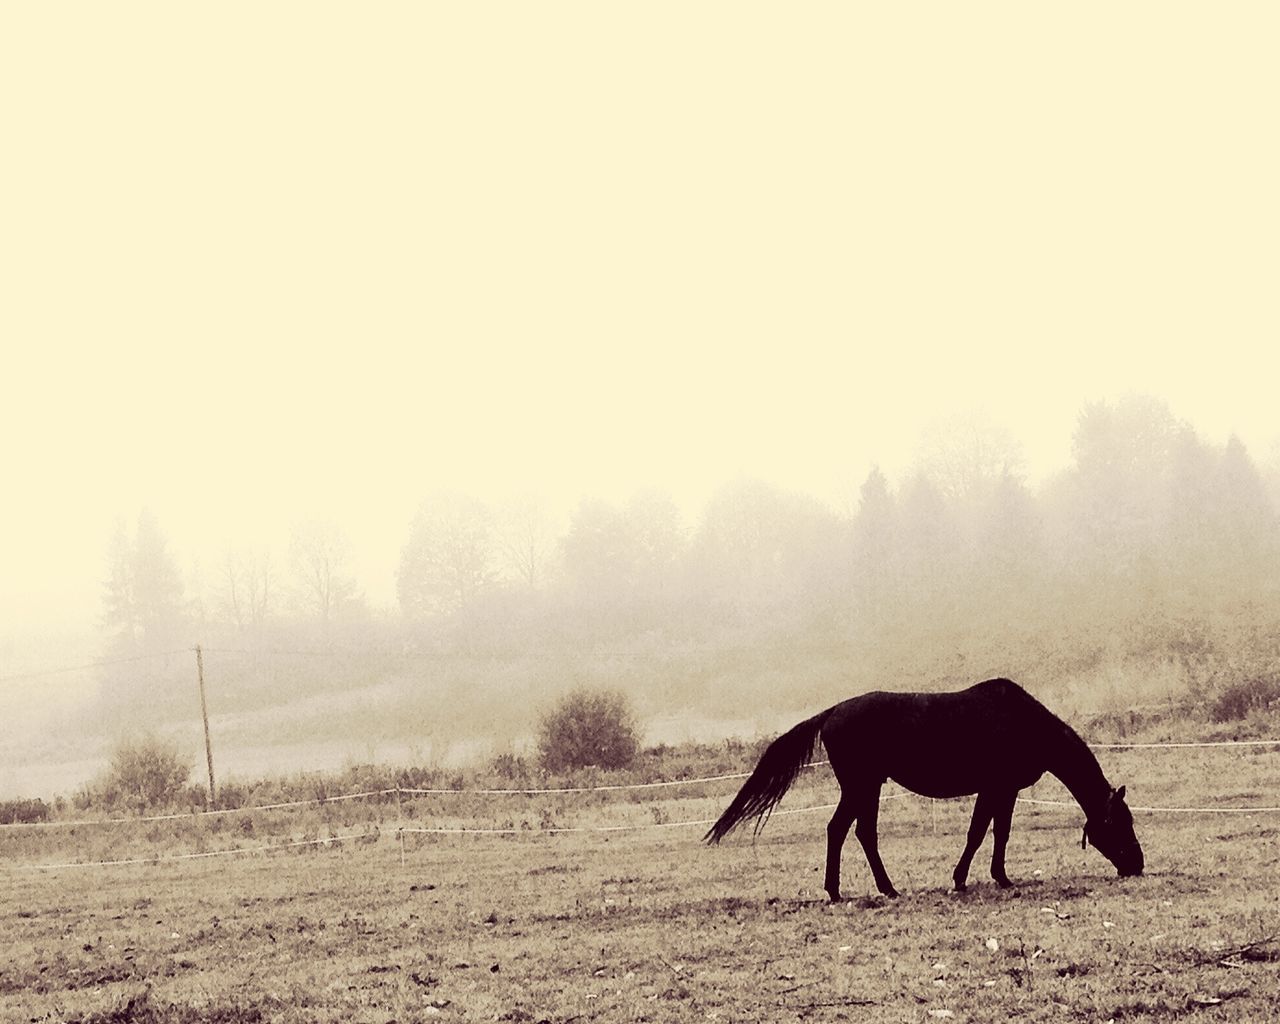 animal themes, domestic animals, mammal, one animal, field, full length, fog, tree, standing, pets, horse, walking, dog, landscape, nature, copy space, foggy, tranquility, tranquil scene